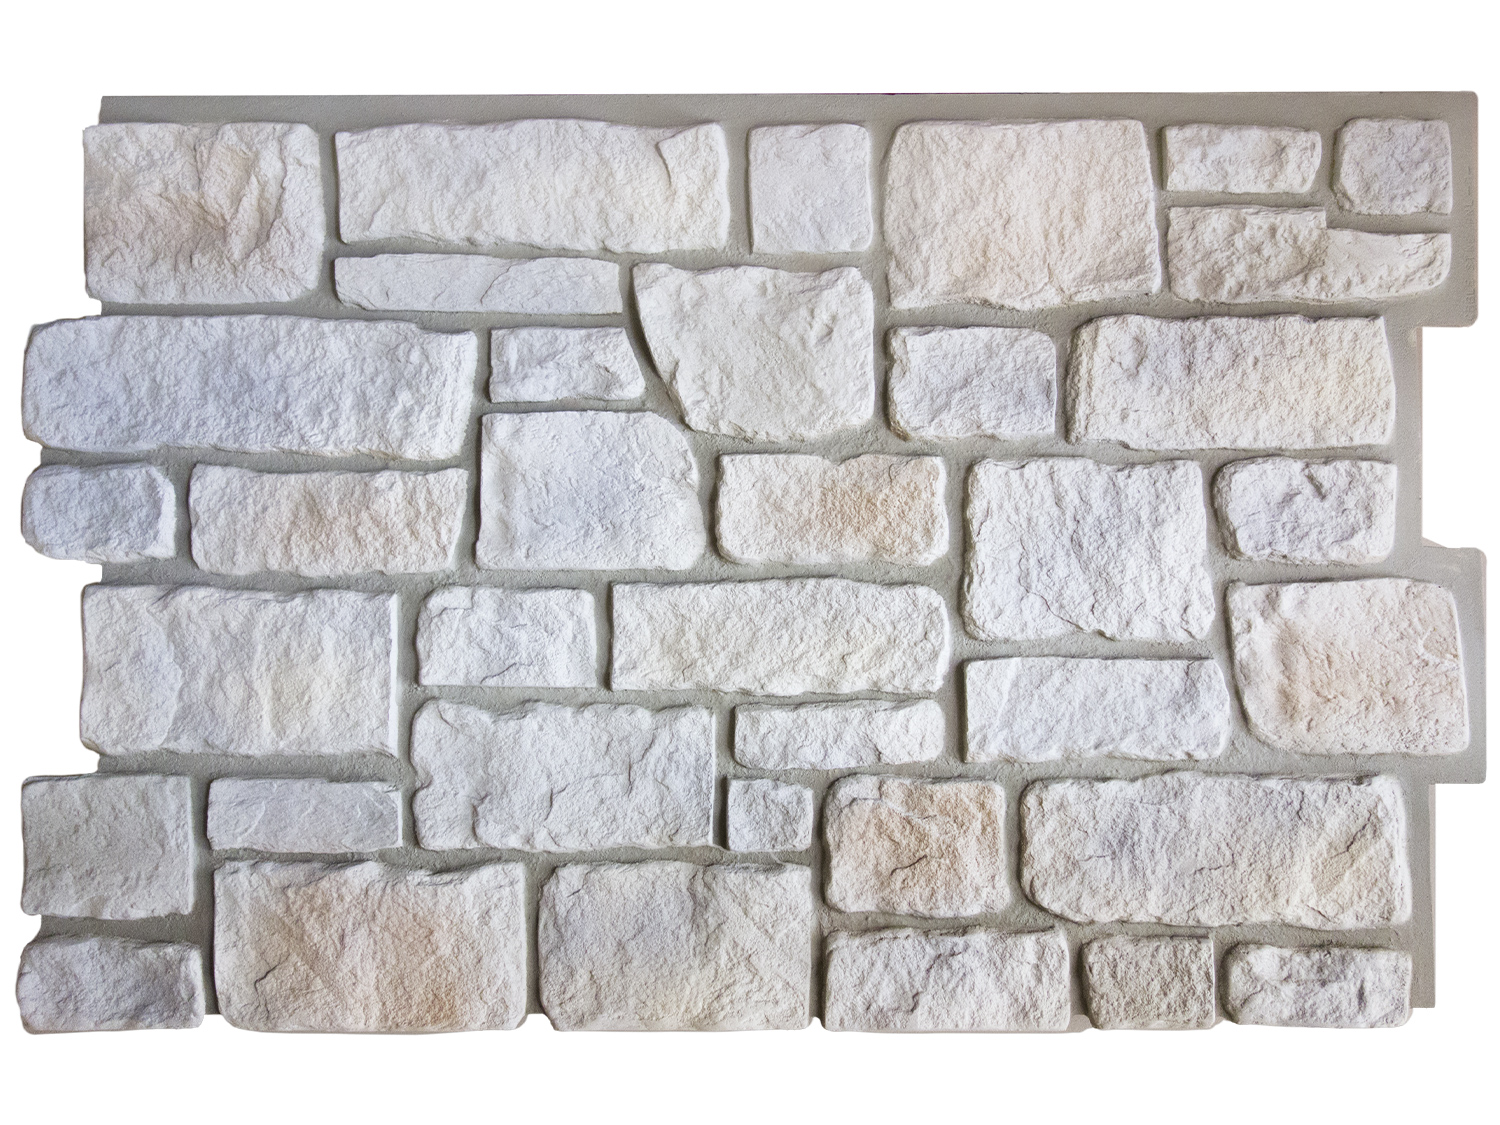 Can this faux stone be used inside the home of affixed to drywall, or can it only be used outside?